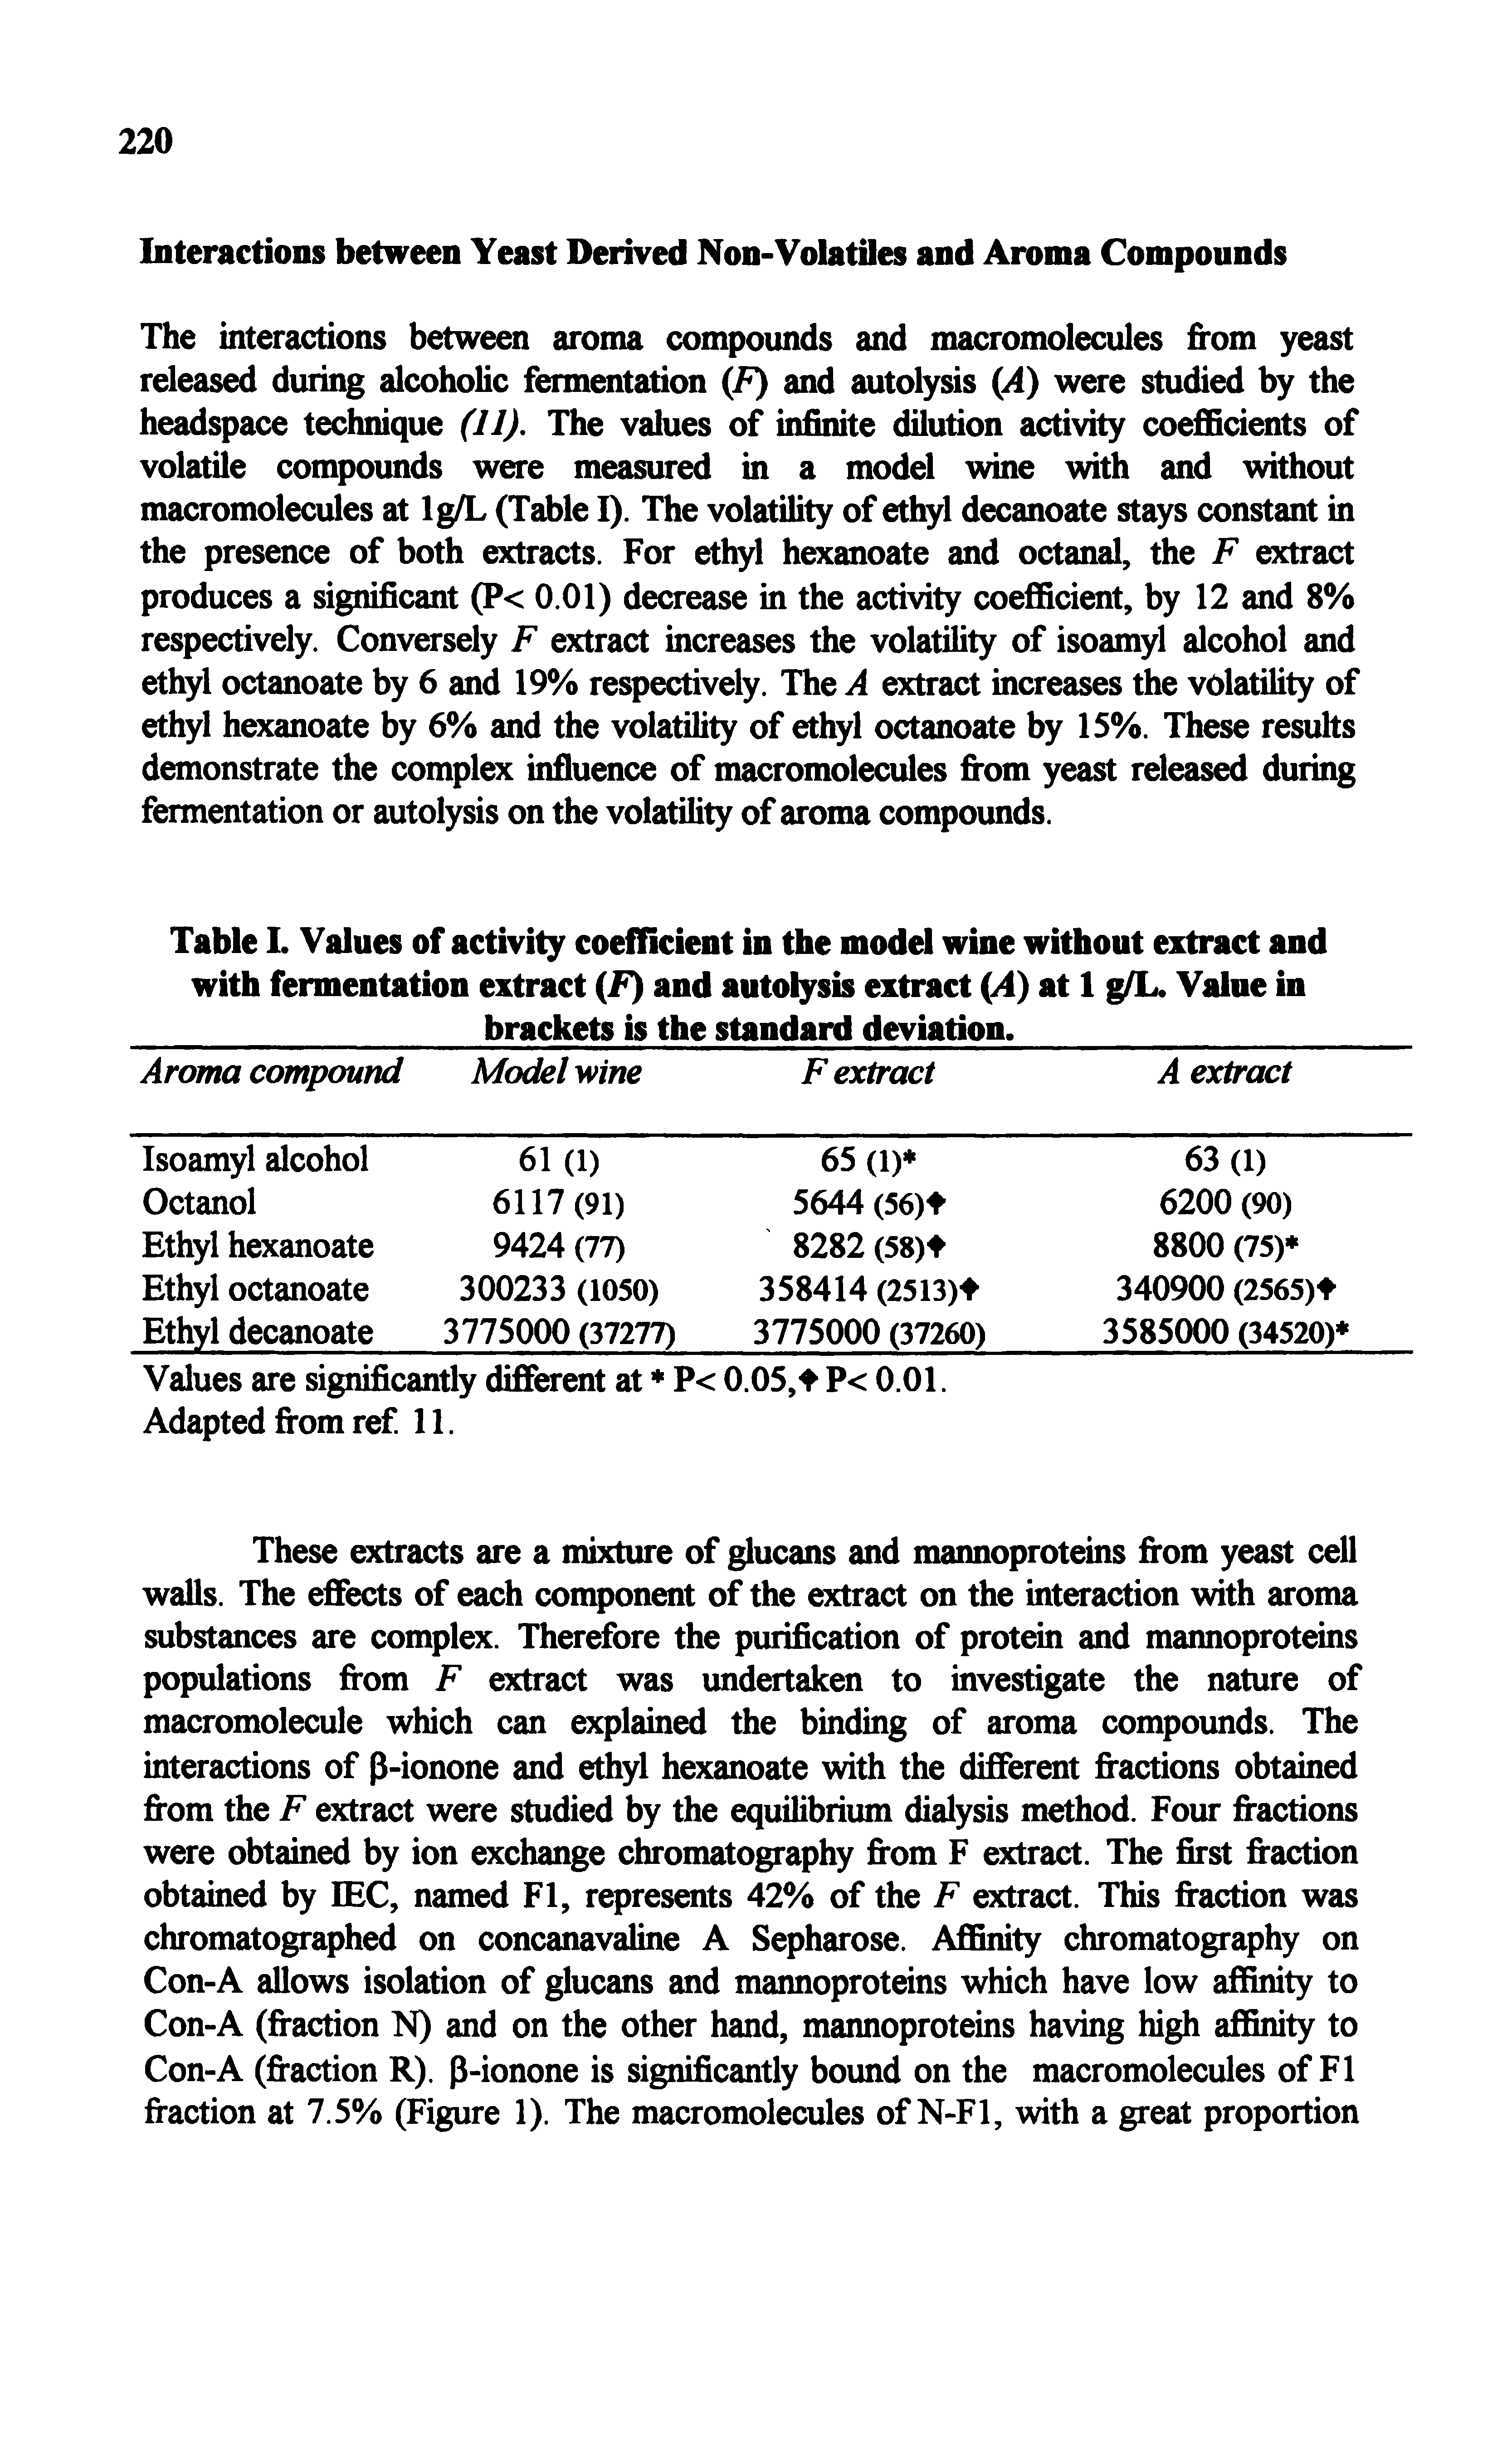 Table 1. Values of activity coefficient in the model wine without extract and with fermentation extract (F) and autolysis extract (A) at 1 g/L. Value in brackets is the standard deviation.